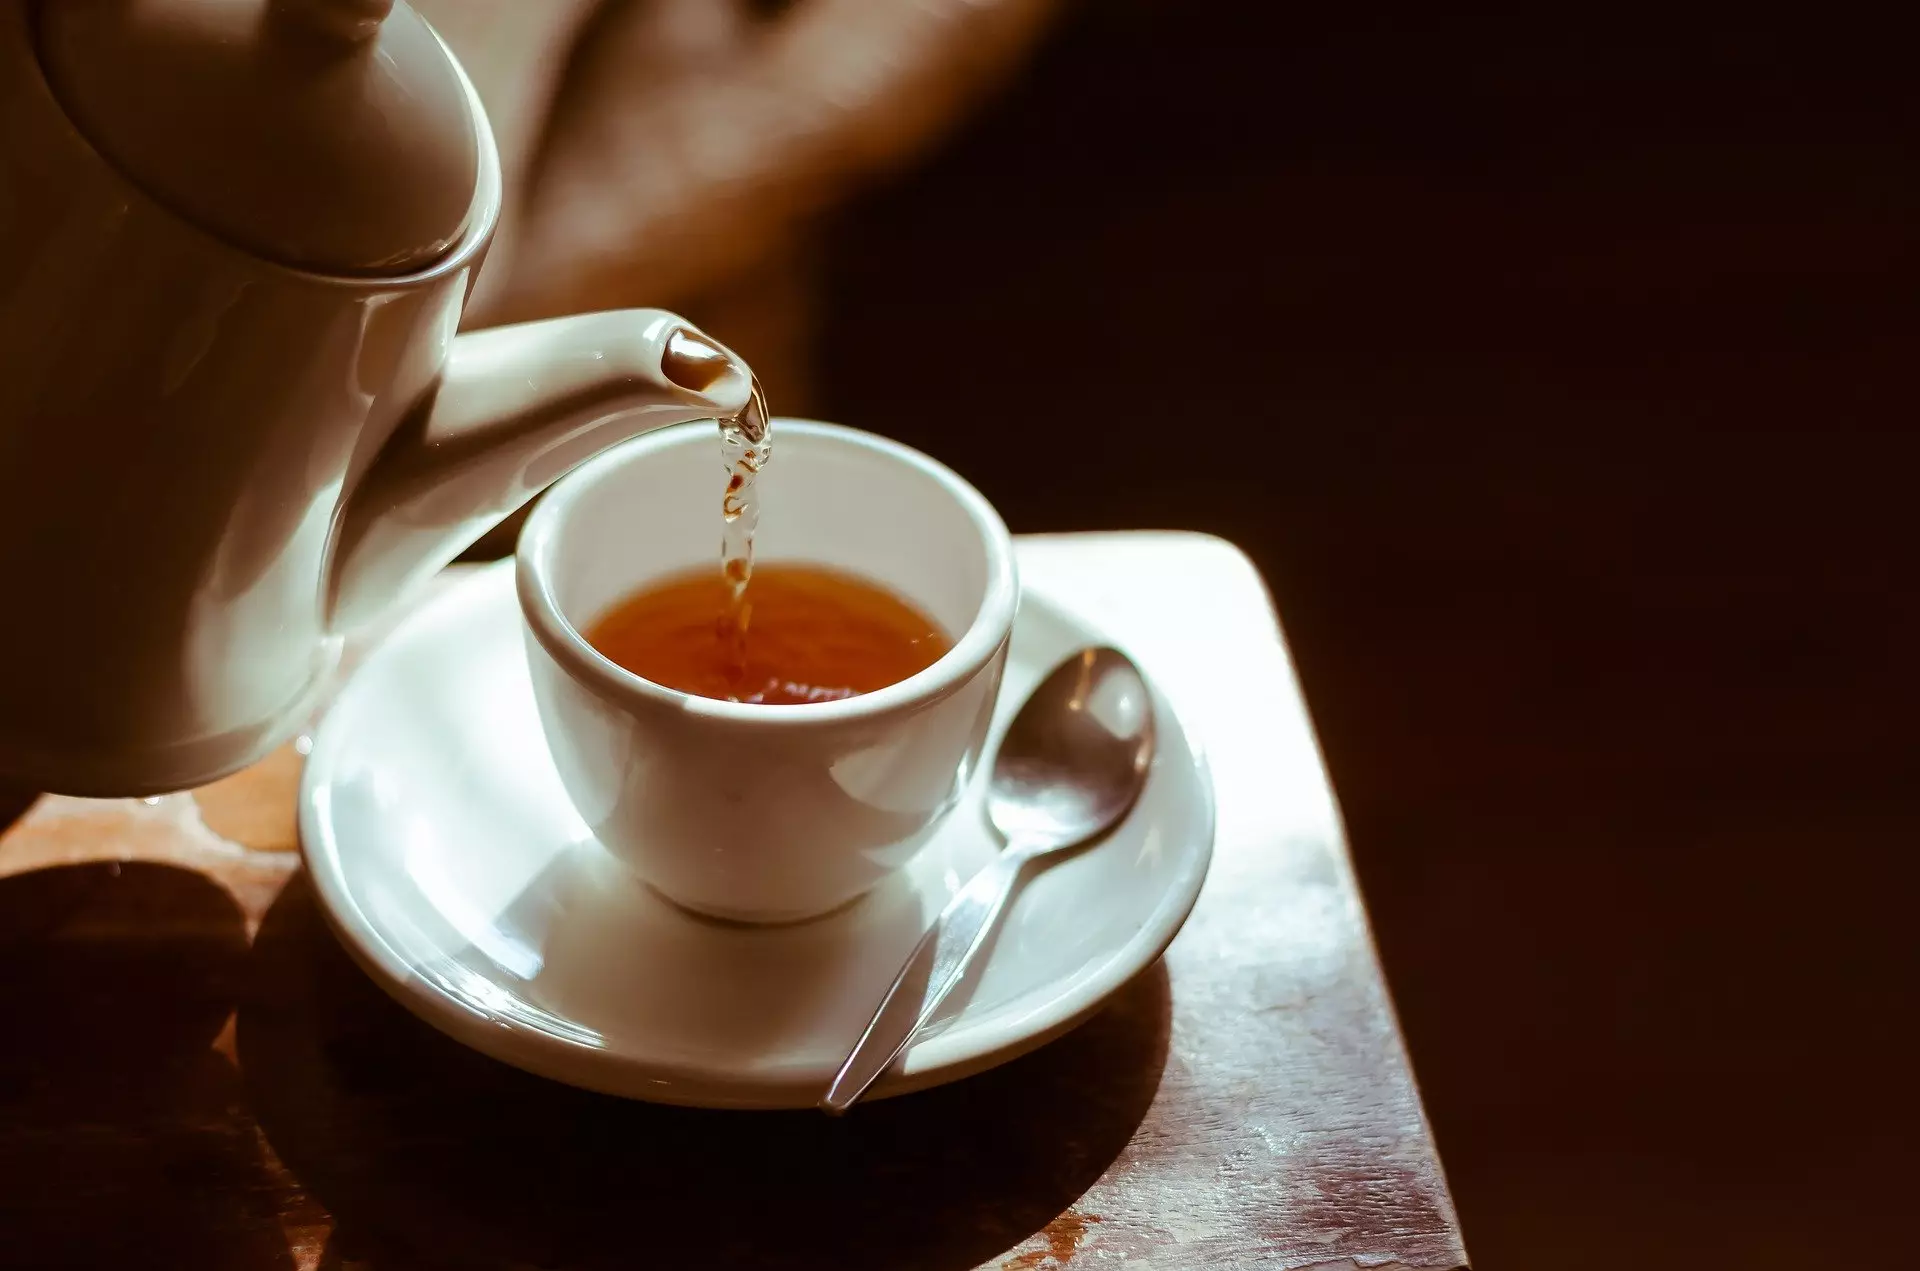 Less could be proven about black tea (or English Breakfast tea) because only eight per cent of participants in the study drank it (